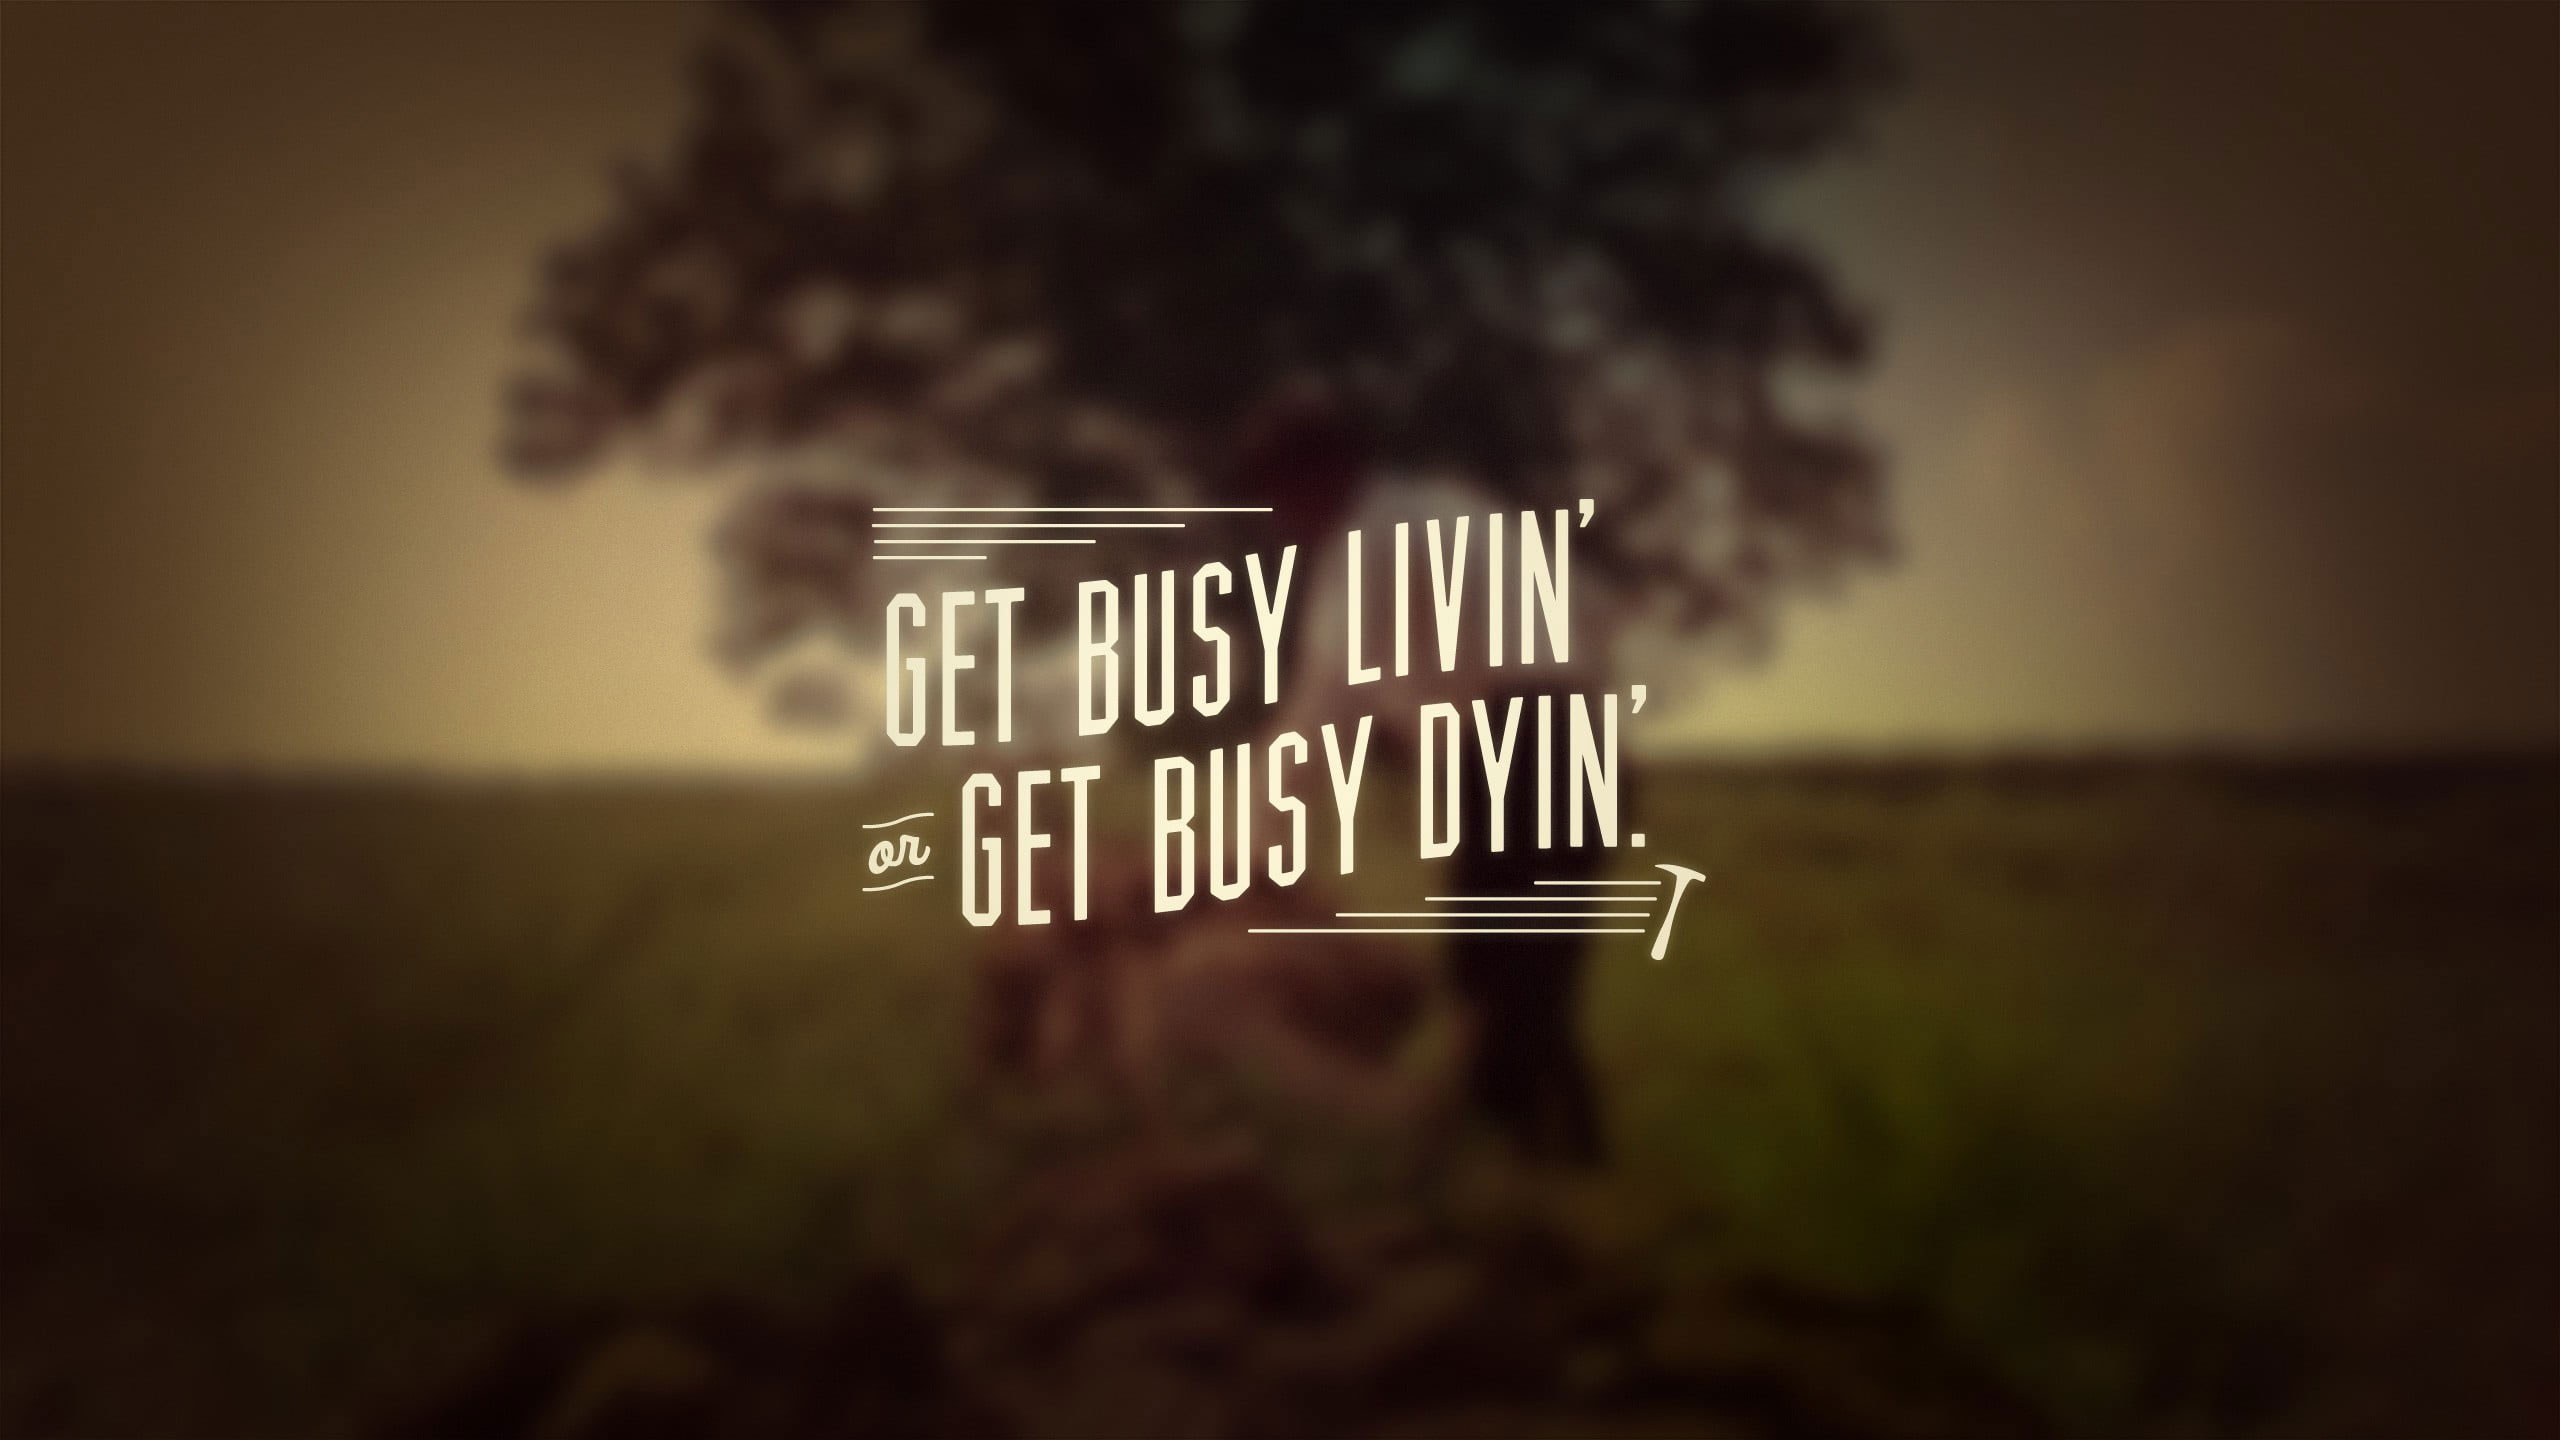 Wallpaper Get Busy Livin Get Busy Dyin, Quote